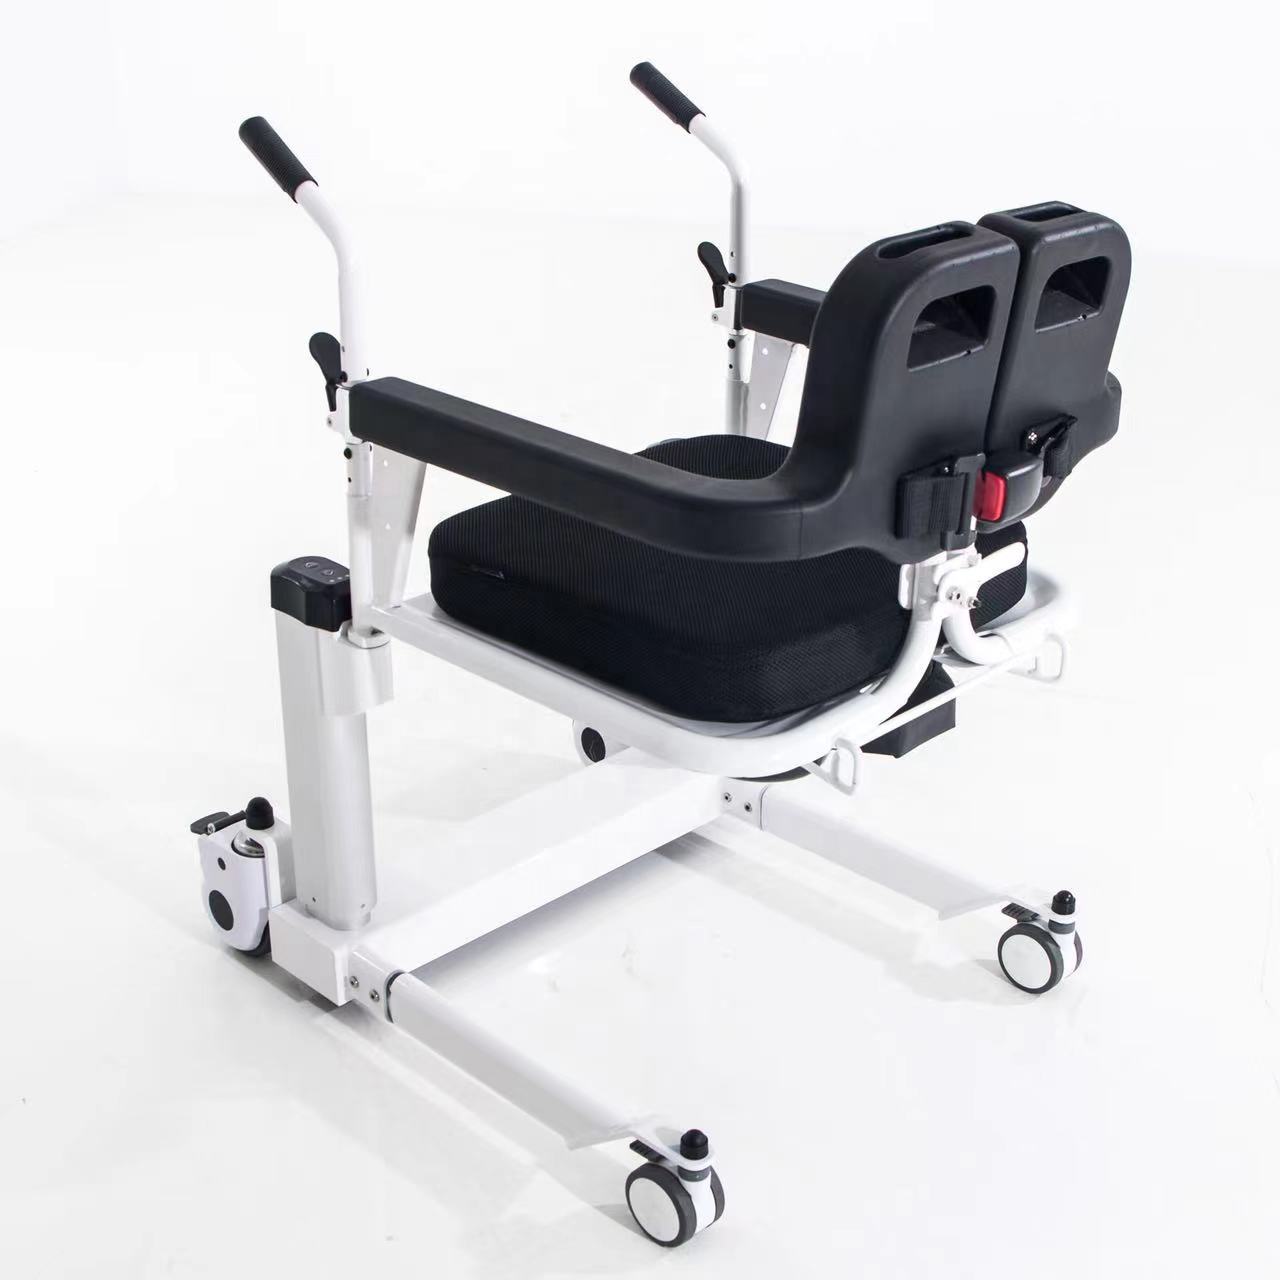  Rehabilitation Therapy Supplies handicap disabled elderly patient bed bathroom shower electric lift transfer commode chair